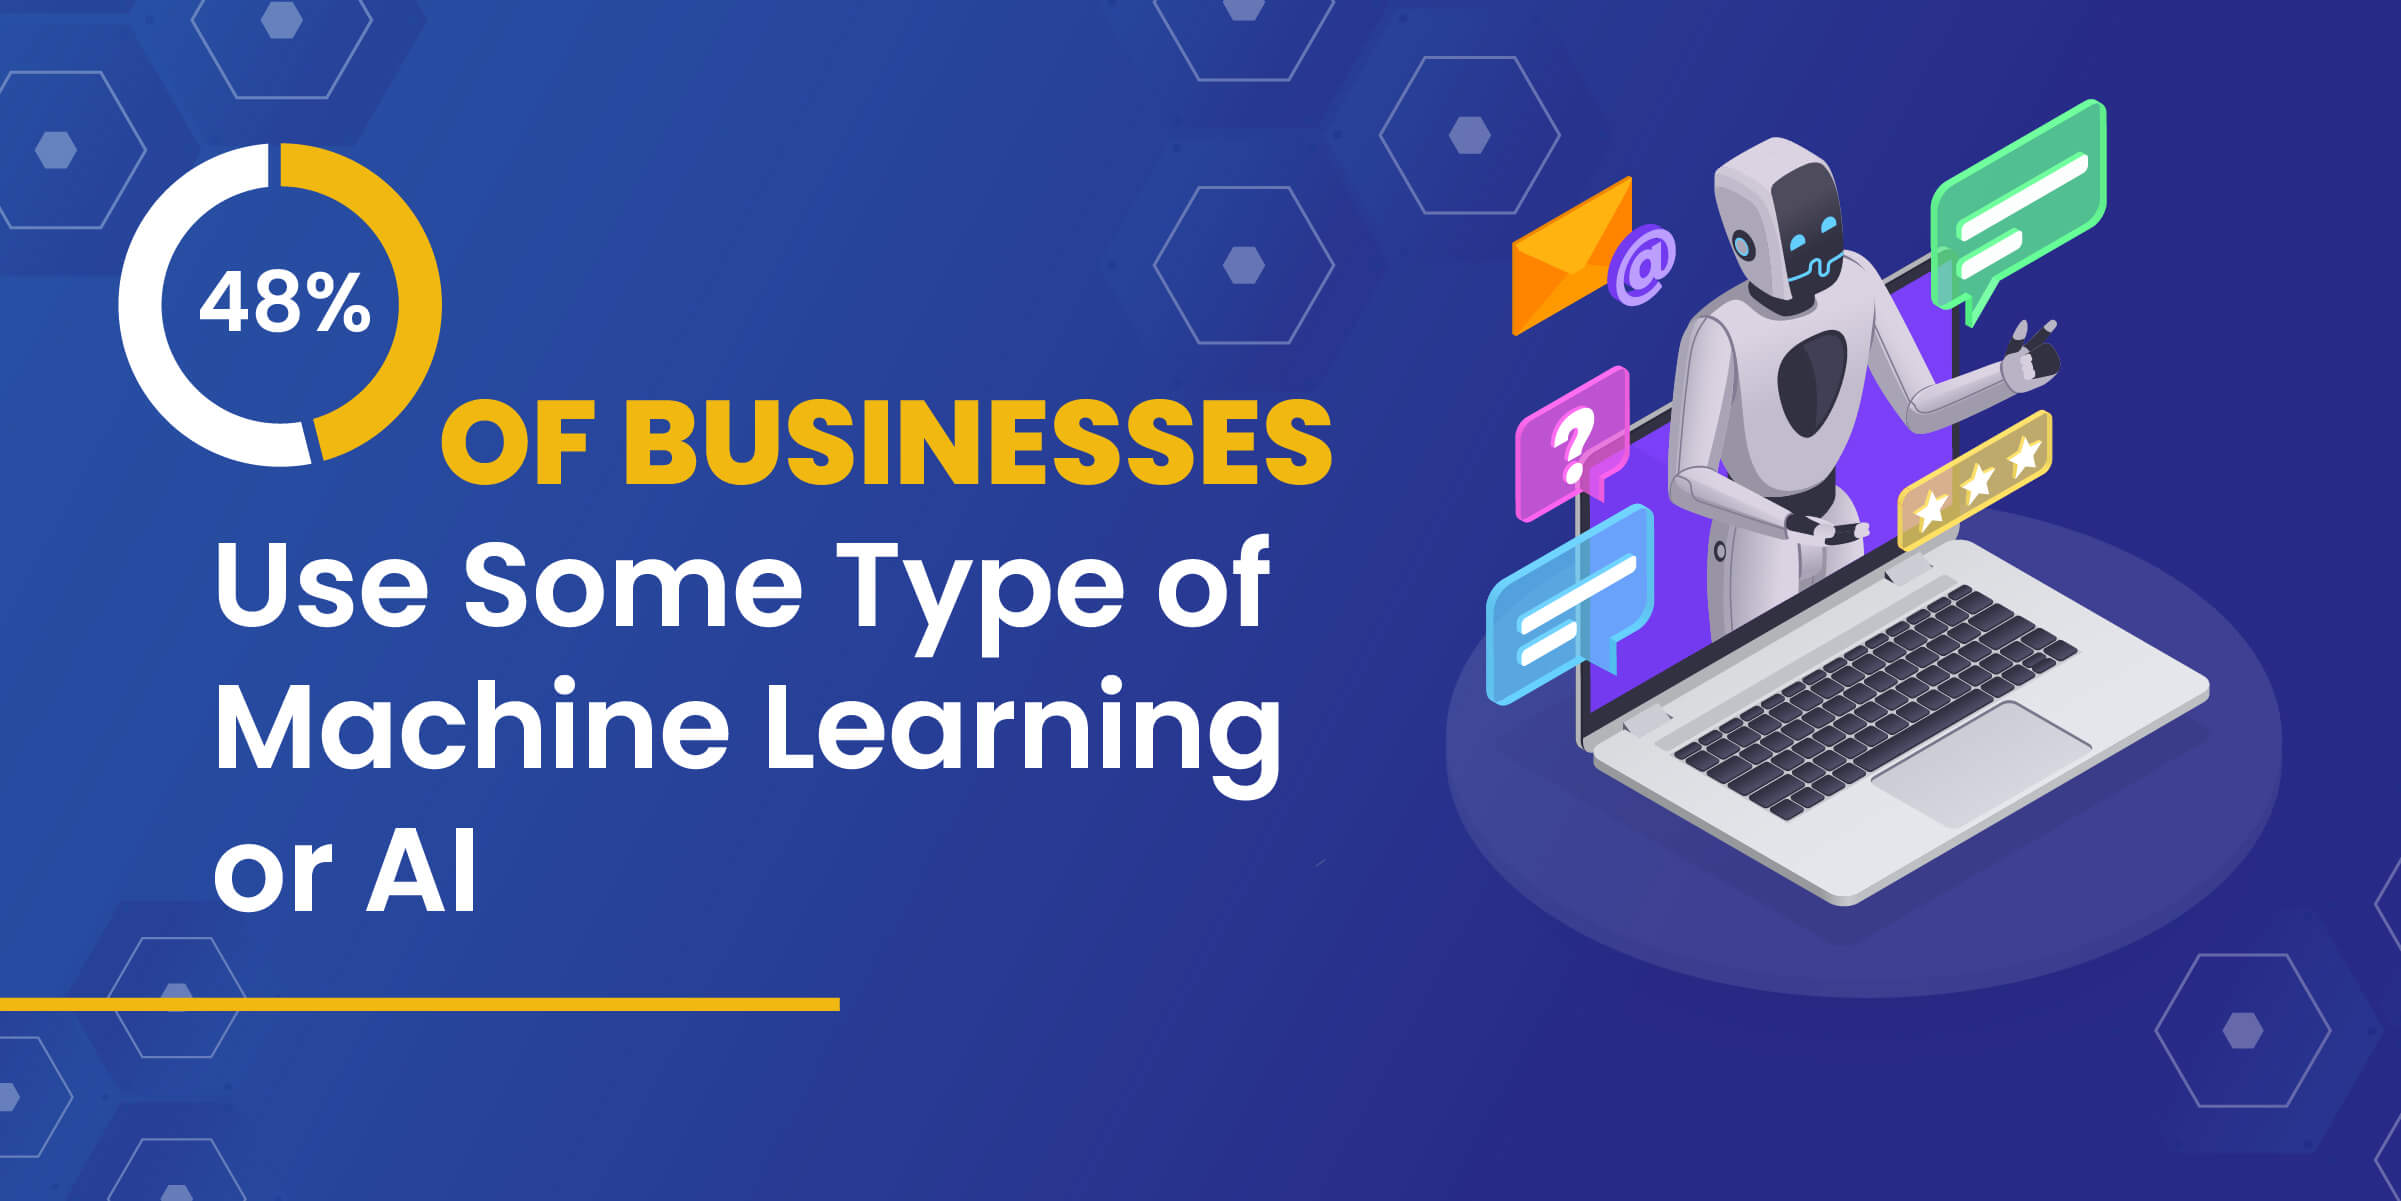 Businesses Use Machine Learning